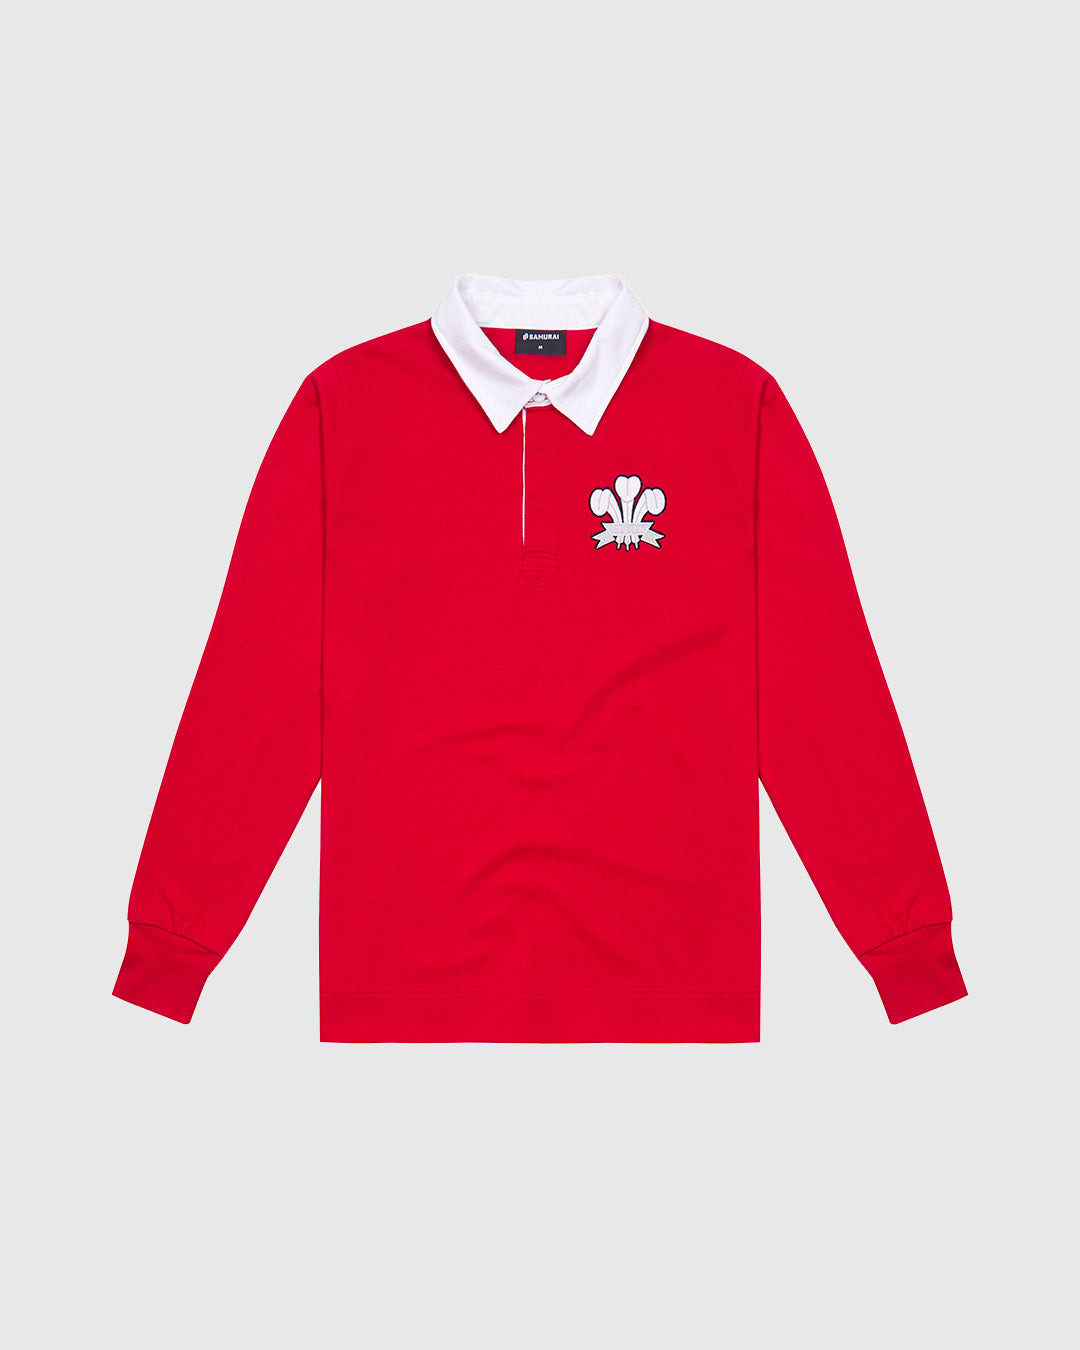 VC: GB-WLS - Women's Vintage Rugby Shirt - Wales